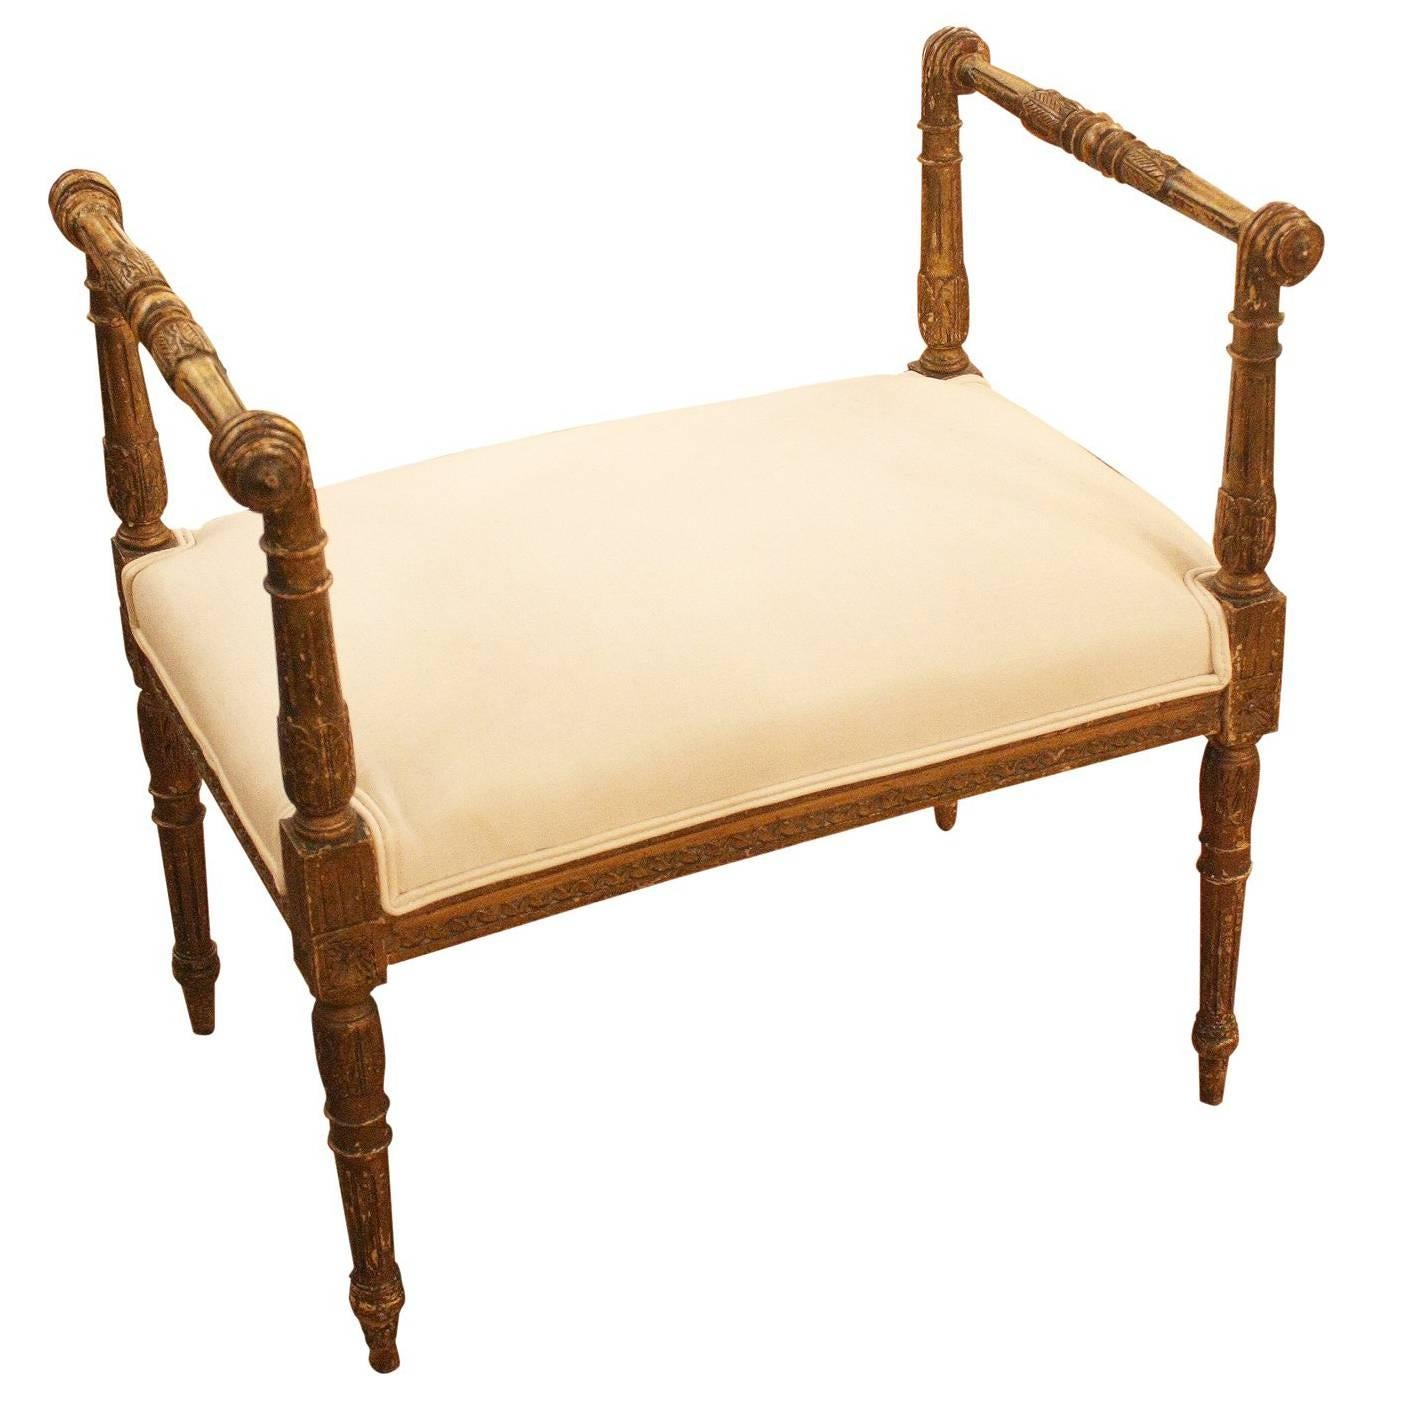 19th Century French Bench with Arms